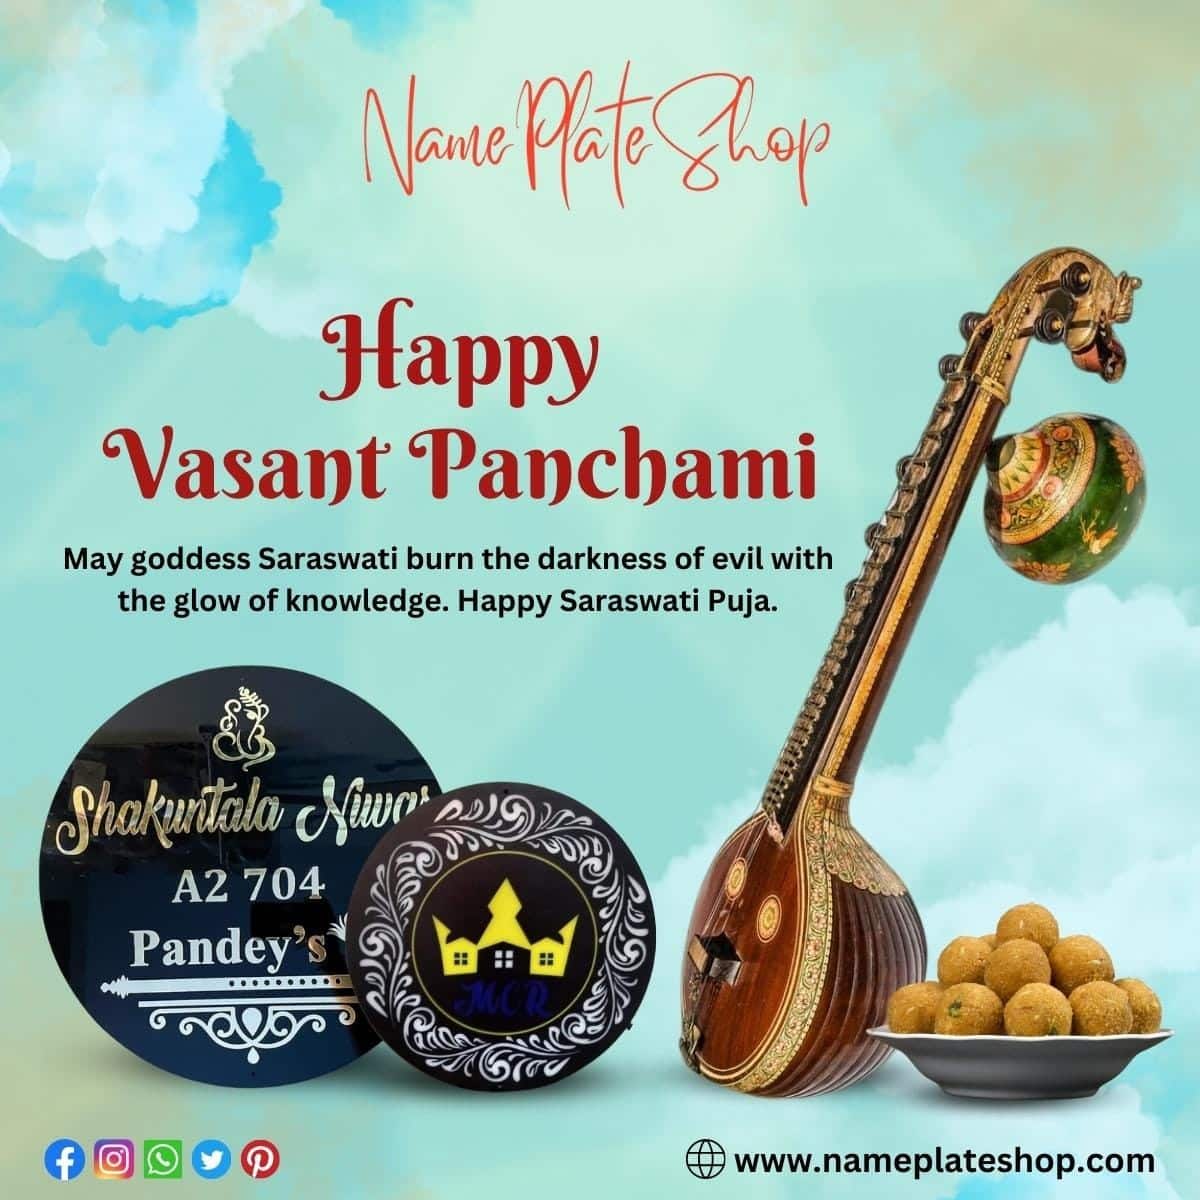 Happy Basant Panchami To All Of You 4